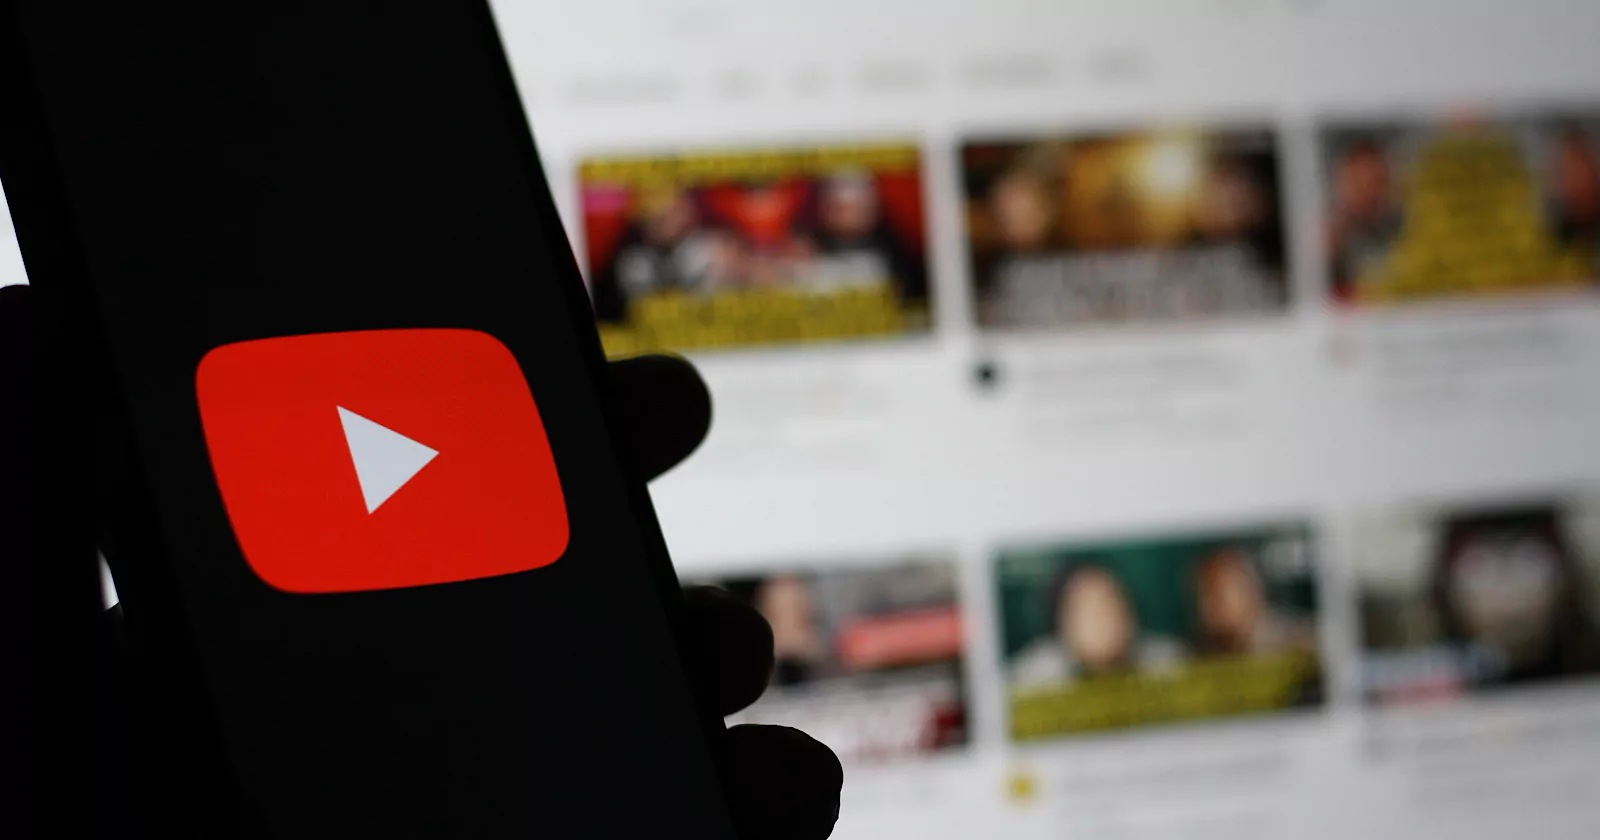 YouTube requires creators to disclose "altered or synthetic content" in videos